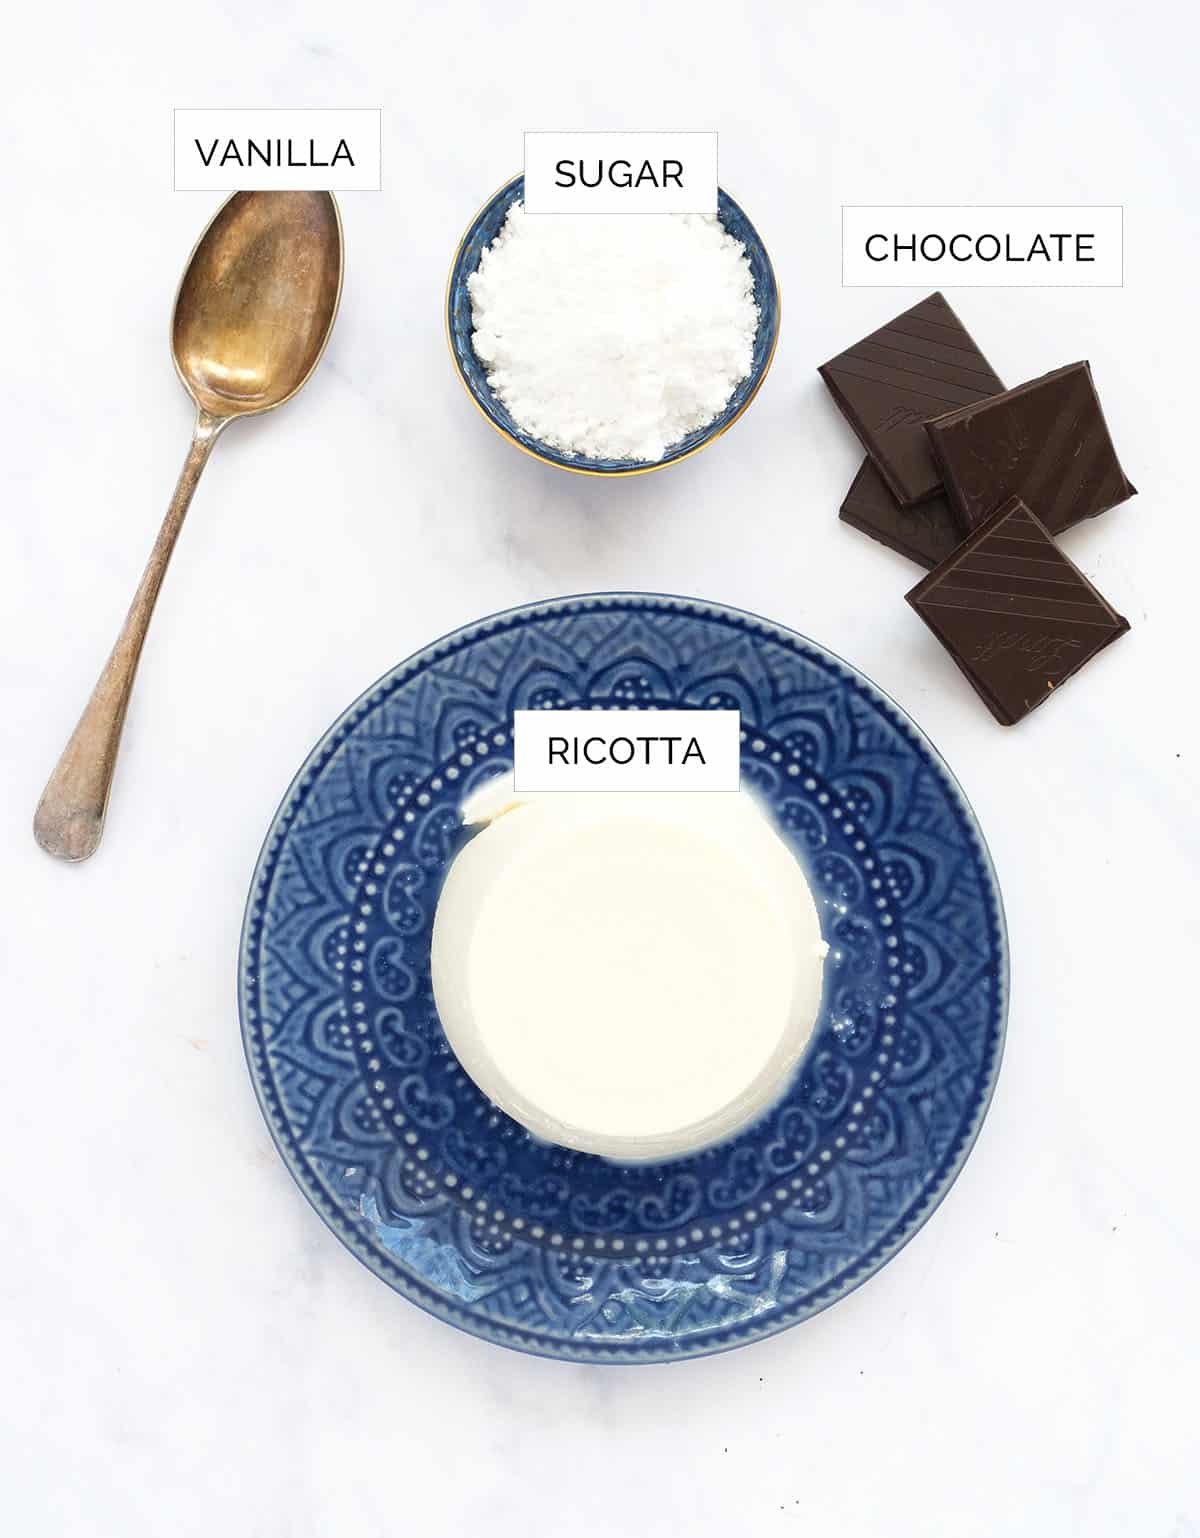 The ingredients to make the ricotta cream are arranged over a white background.